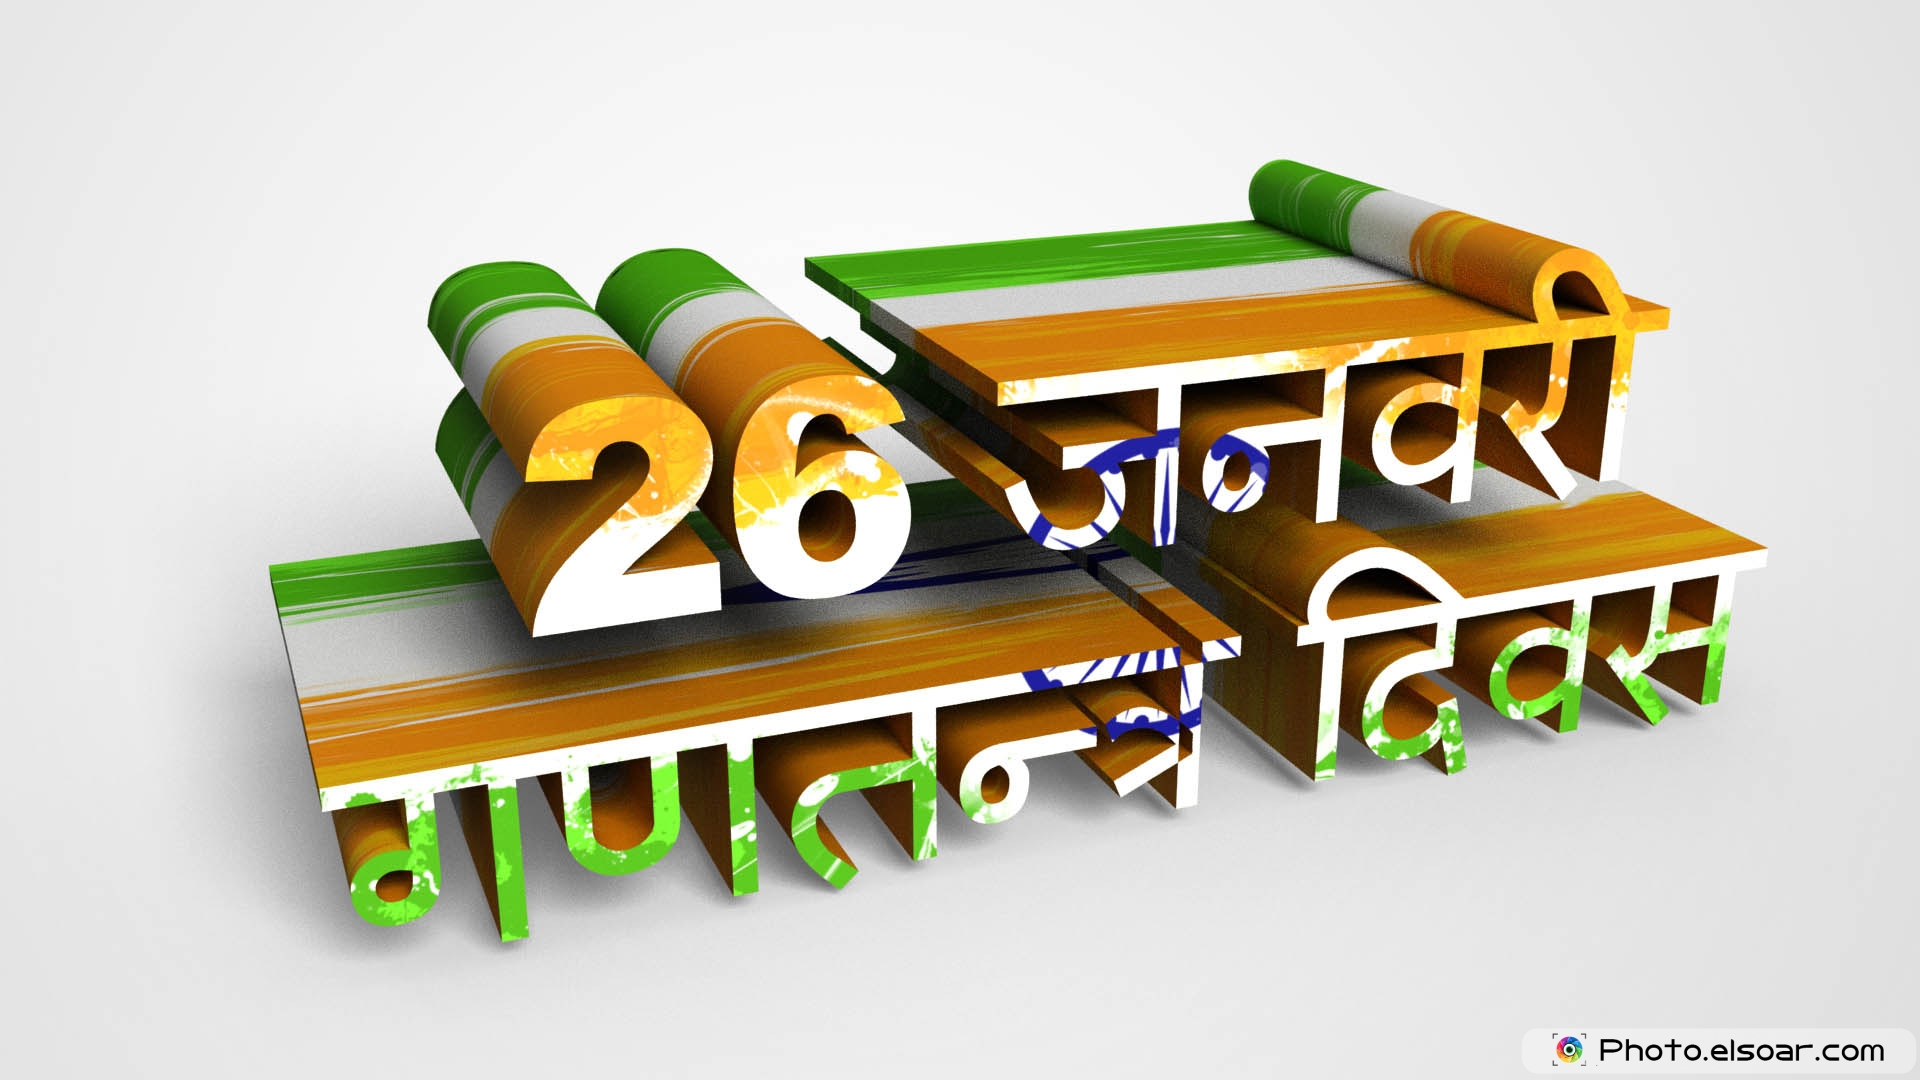 Indian Republic Day In Hindi Image - Plywood - HD Wallpaper 